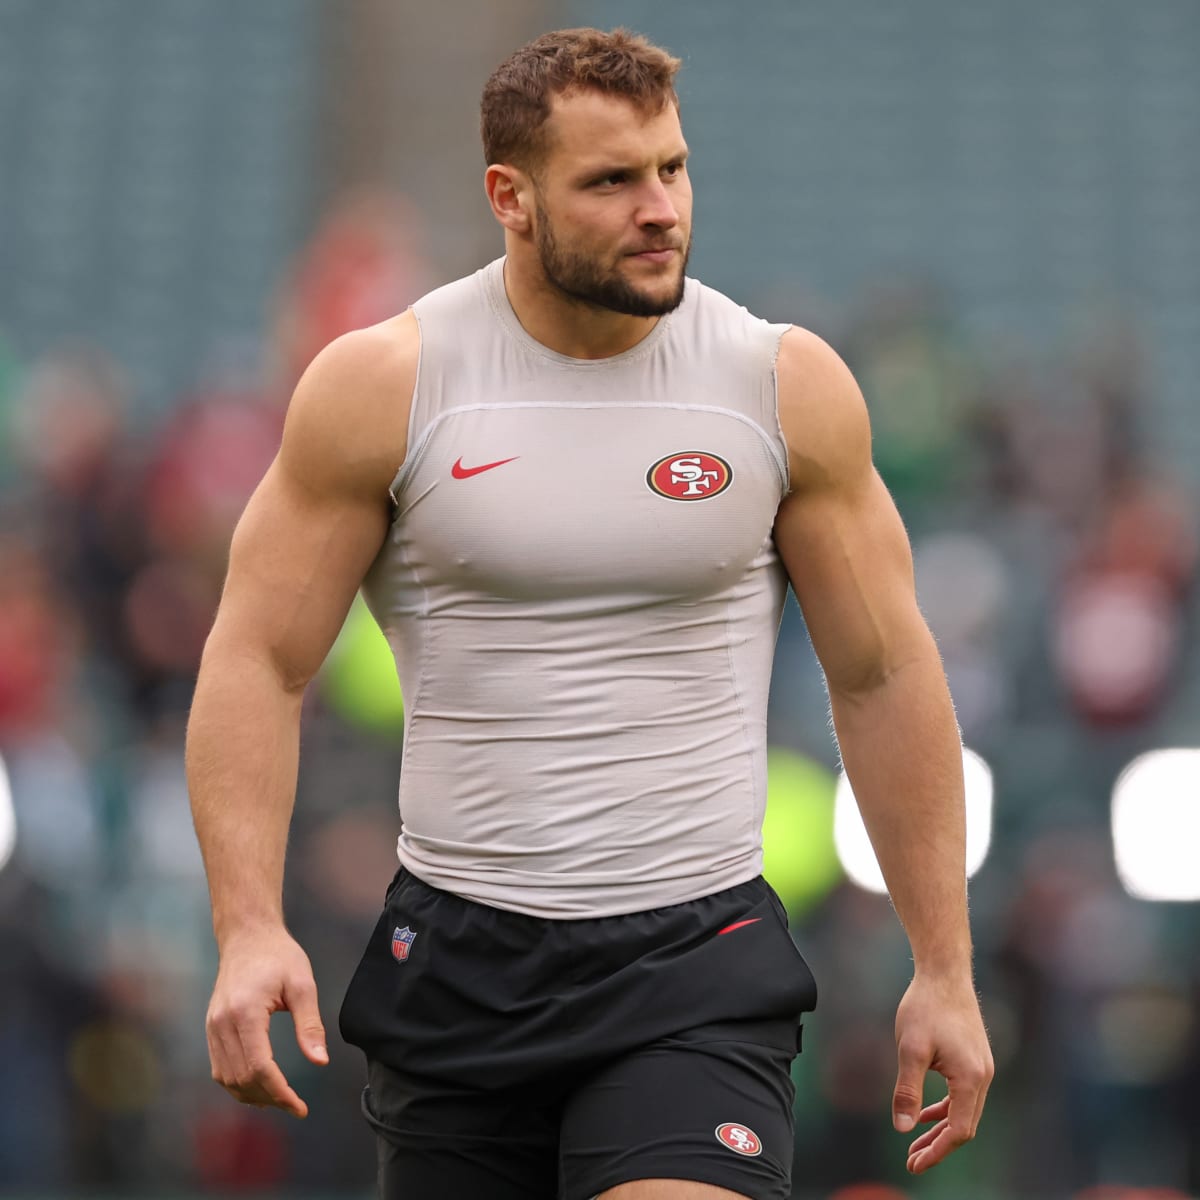 The strengths and weaknesses of Nick Bosa